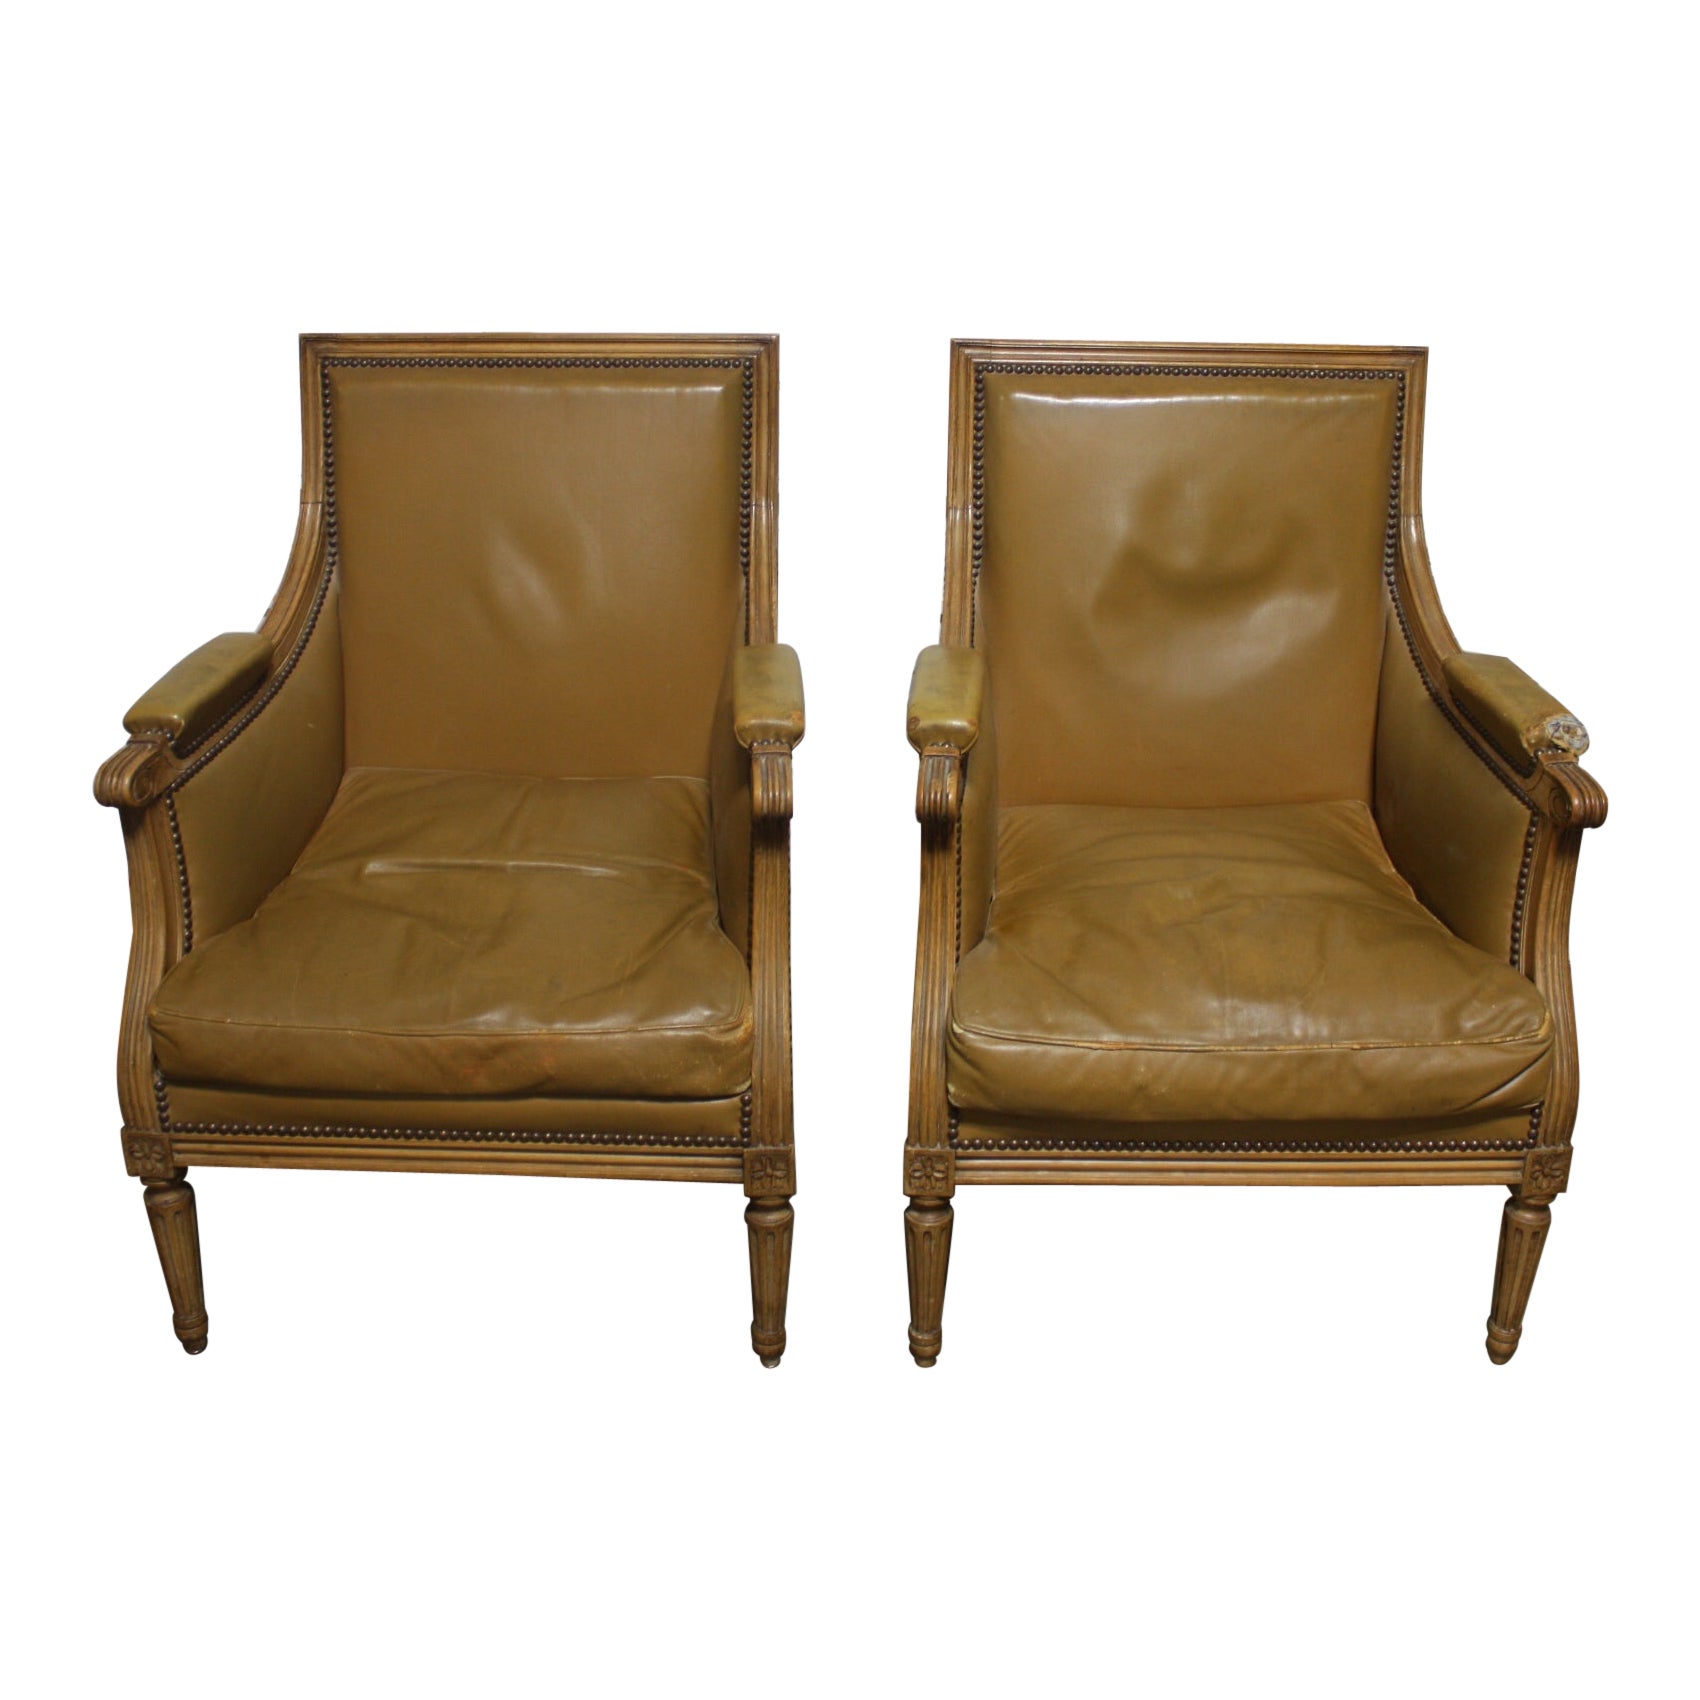 French Louis XVI Pair of Bergere Chairs